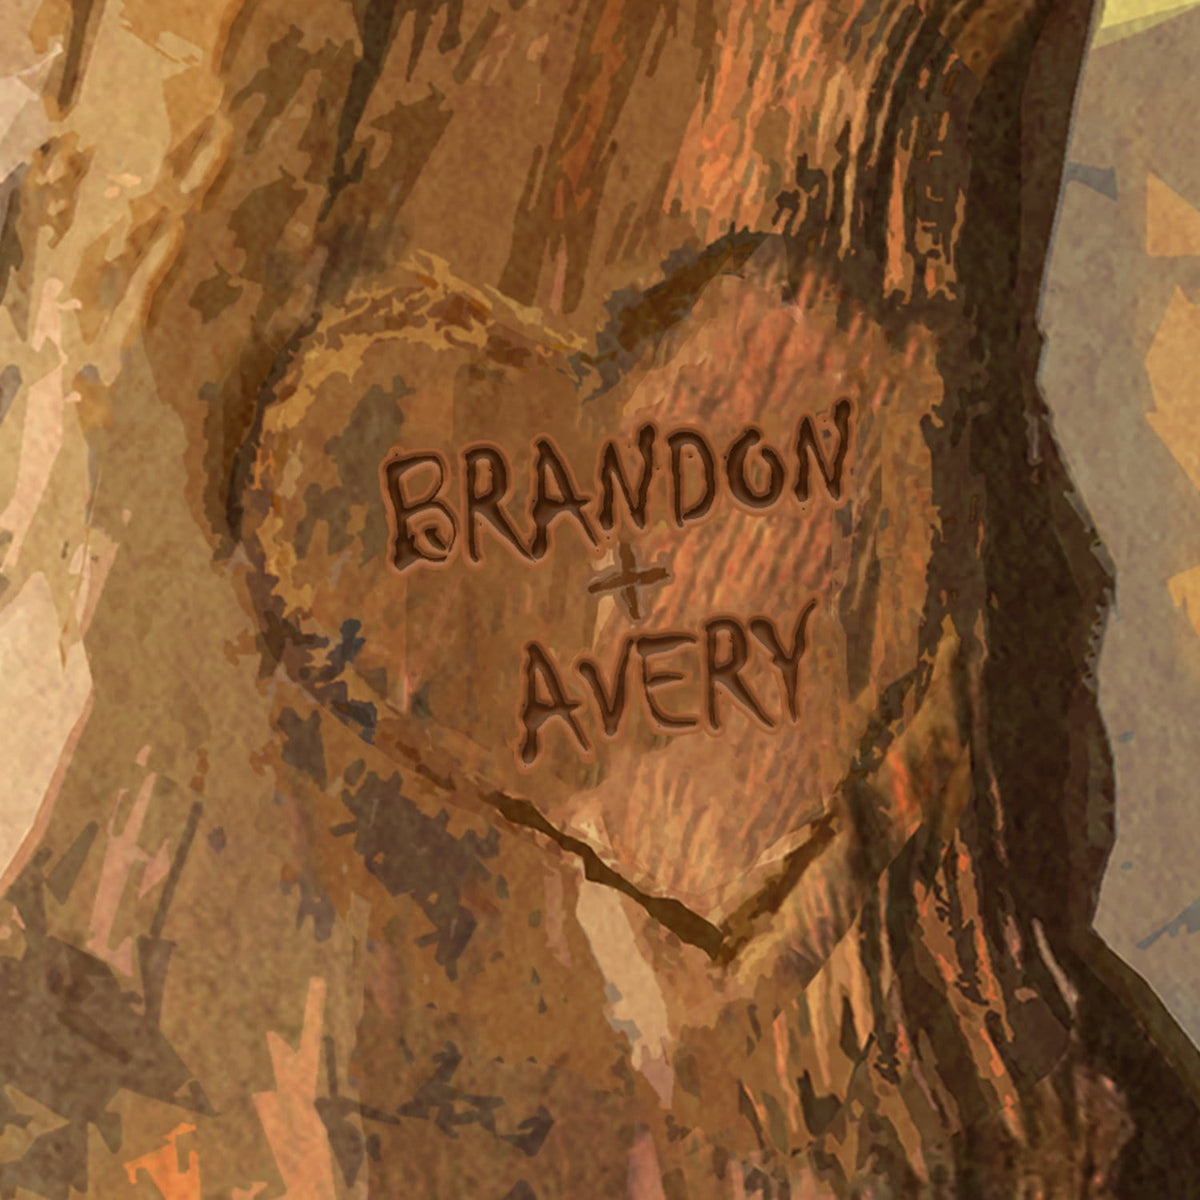 personalization detail of heart